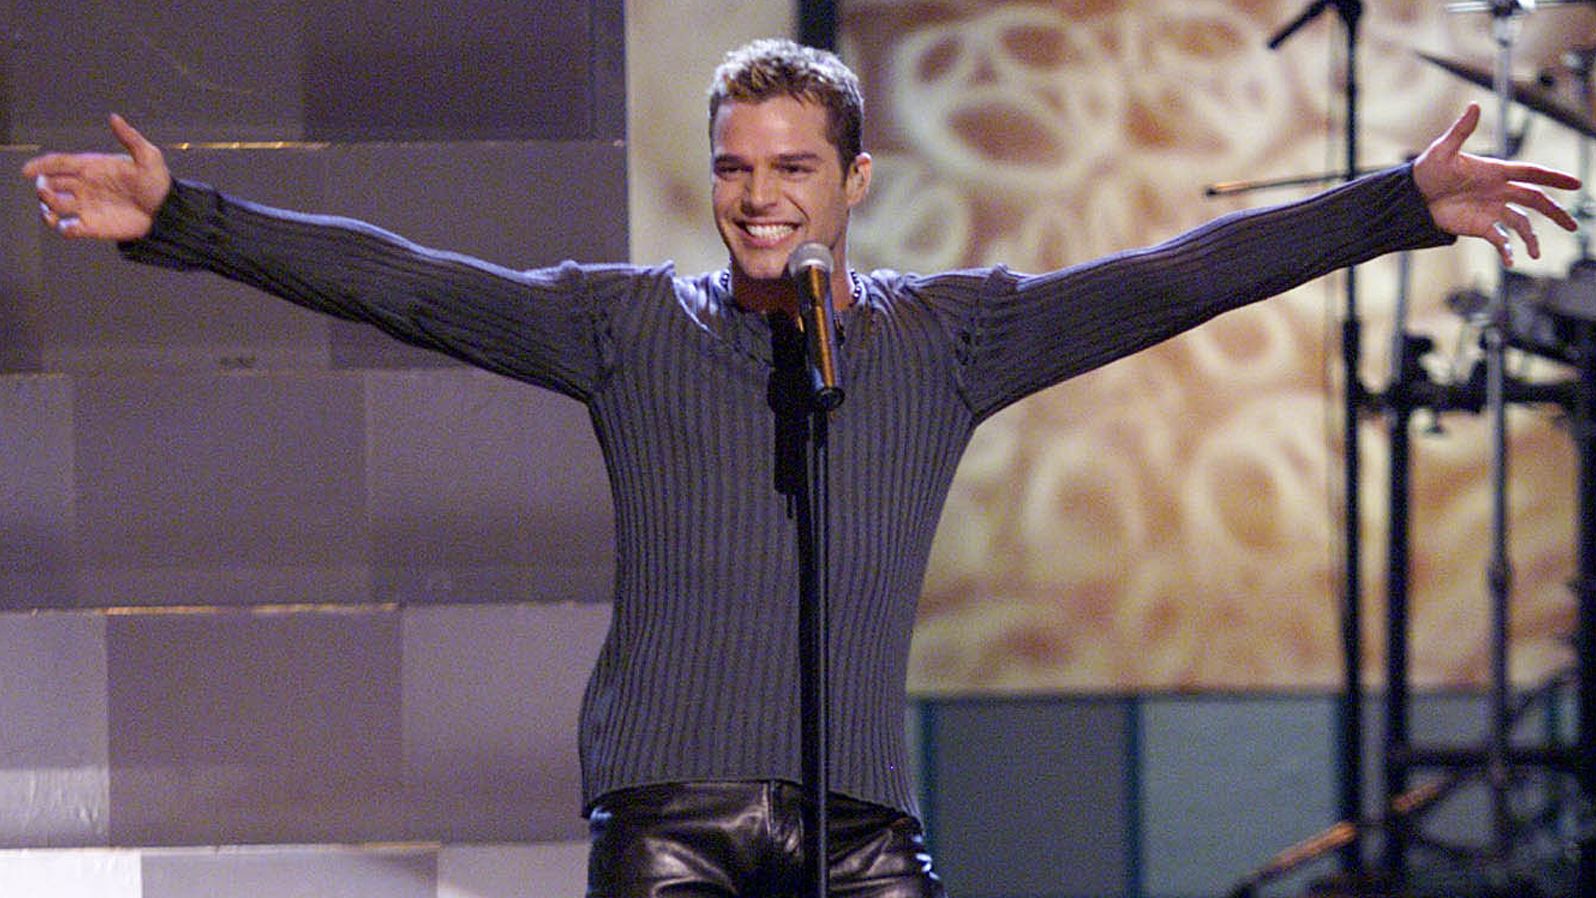 Ricky Martin's performance at the 1999 Grammy Awards marked a turning point for his career and for Latin music in the US overall.